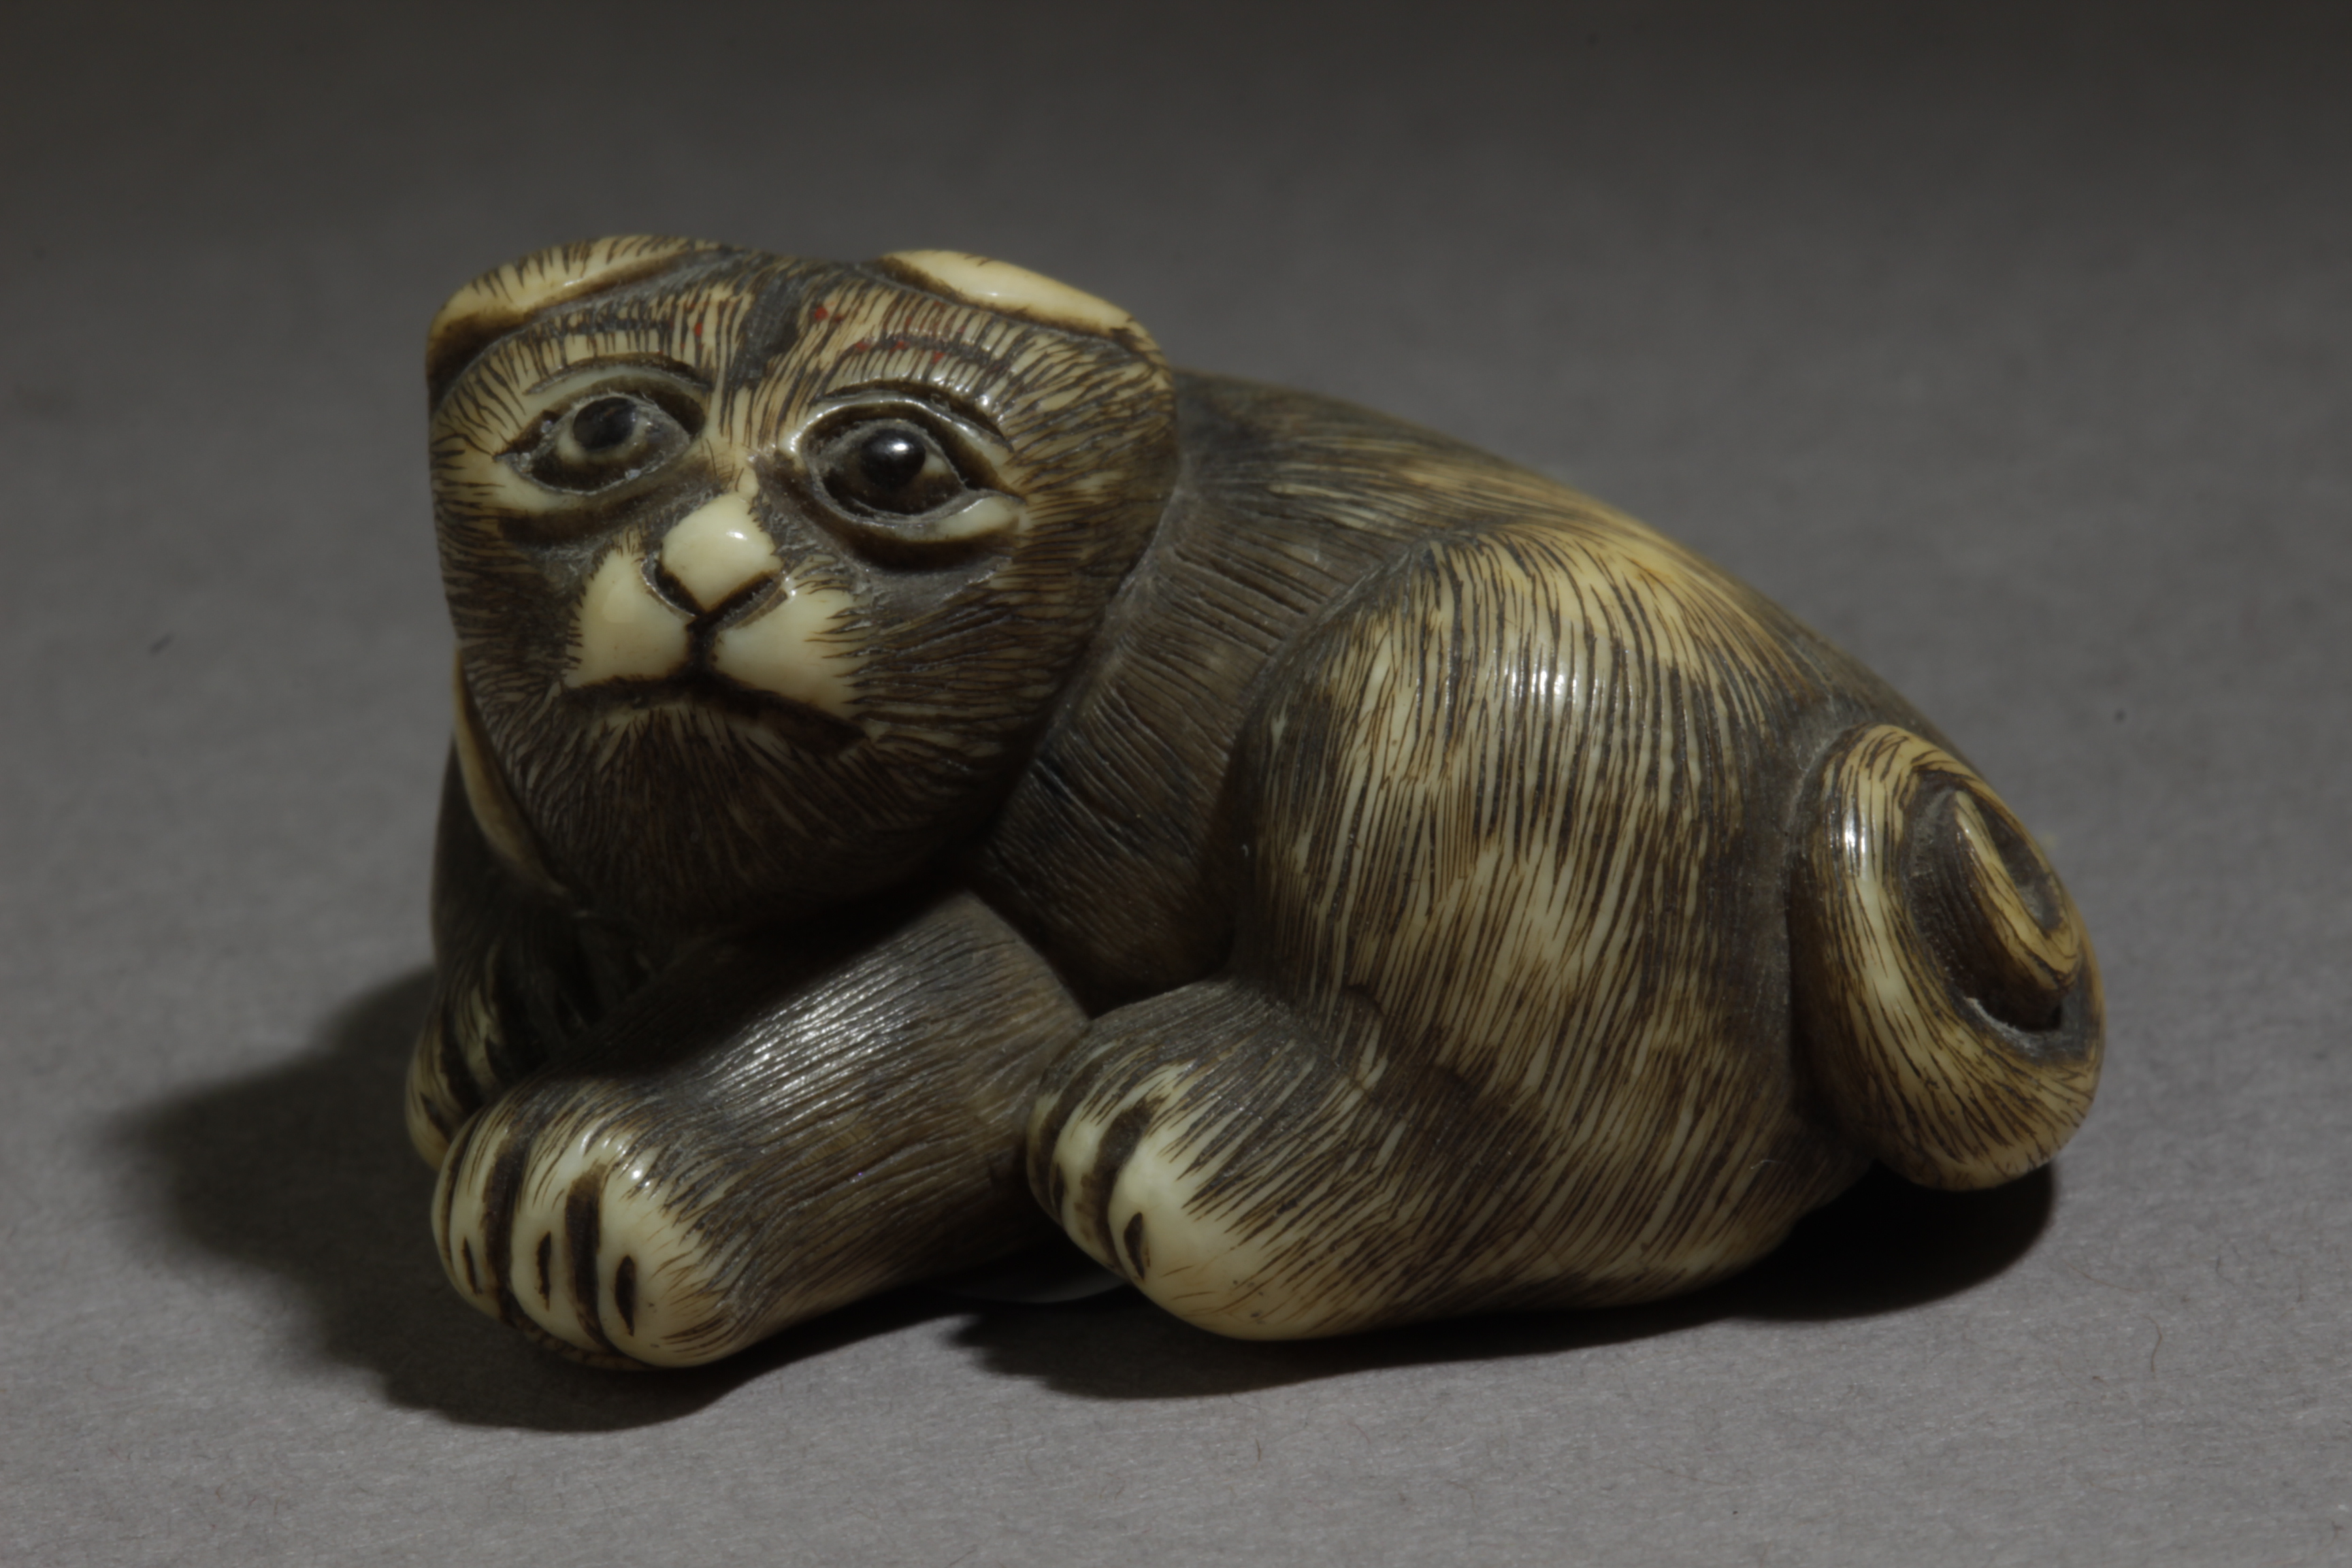 A first third of 20th century Japanese netsuke from Meiji period